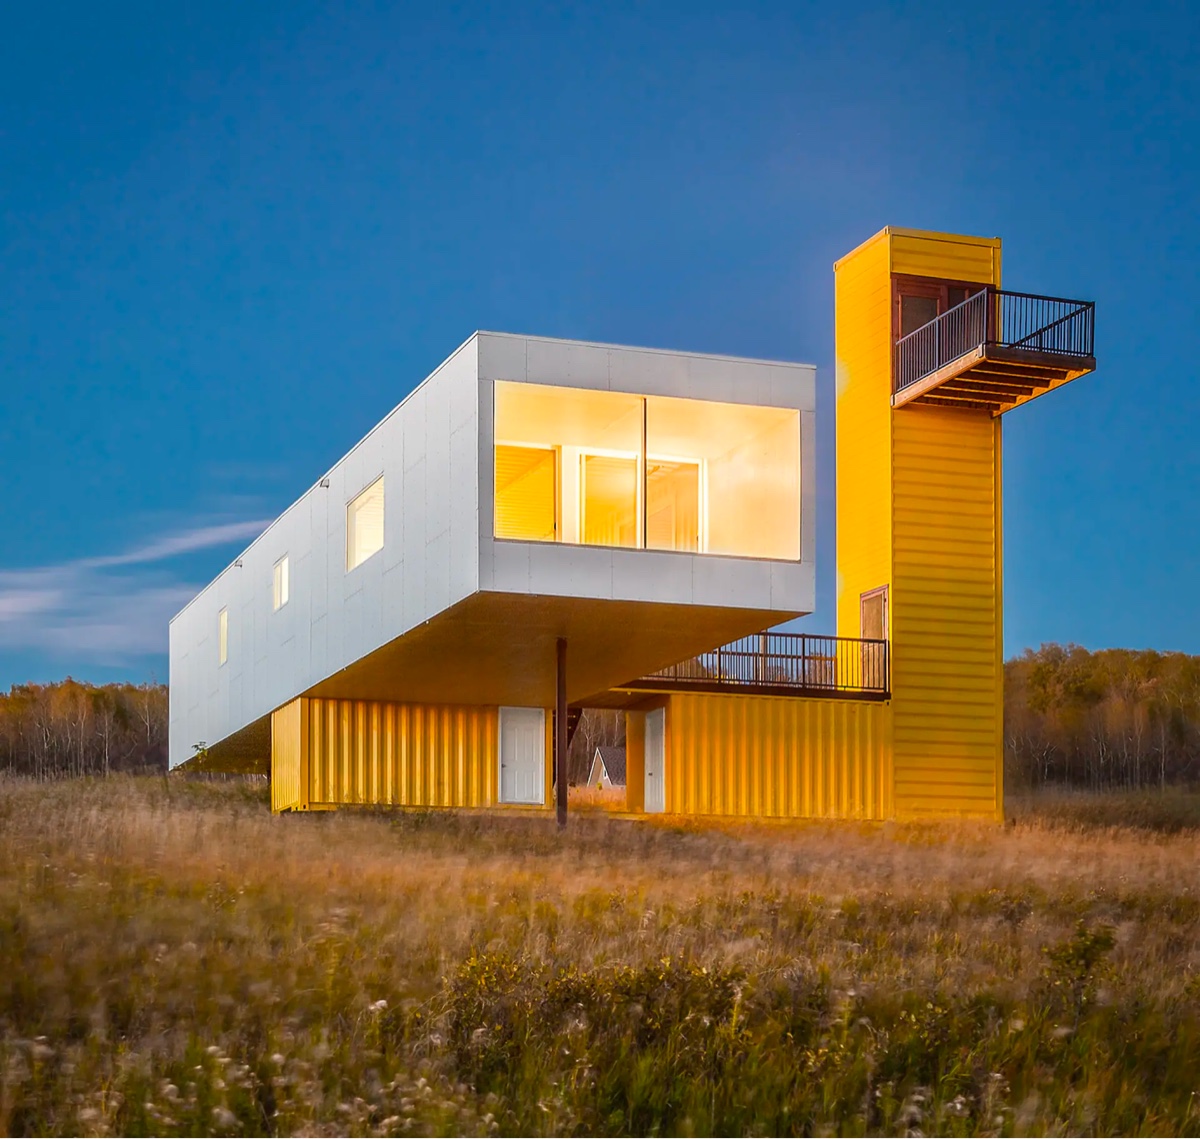 51 Shipping Container Homes That Will Change How You Think About Home Design thumbnail